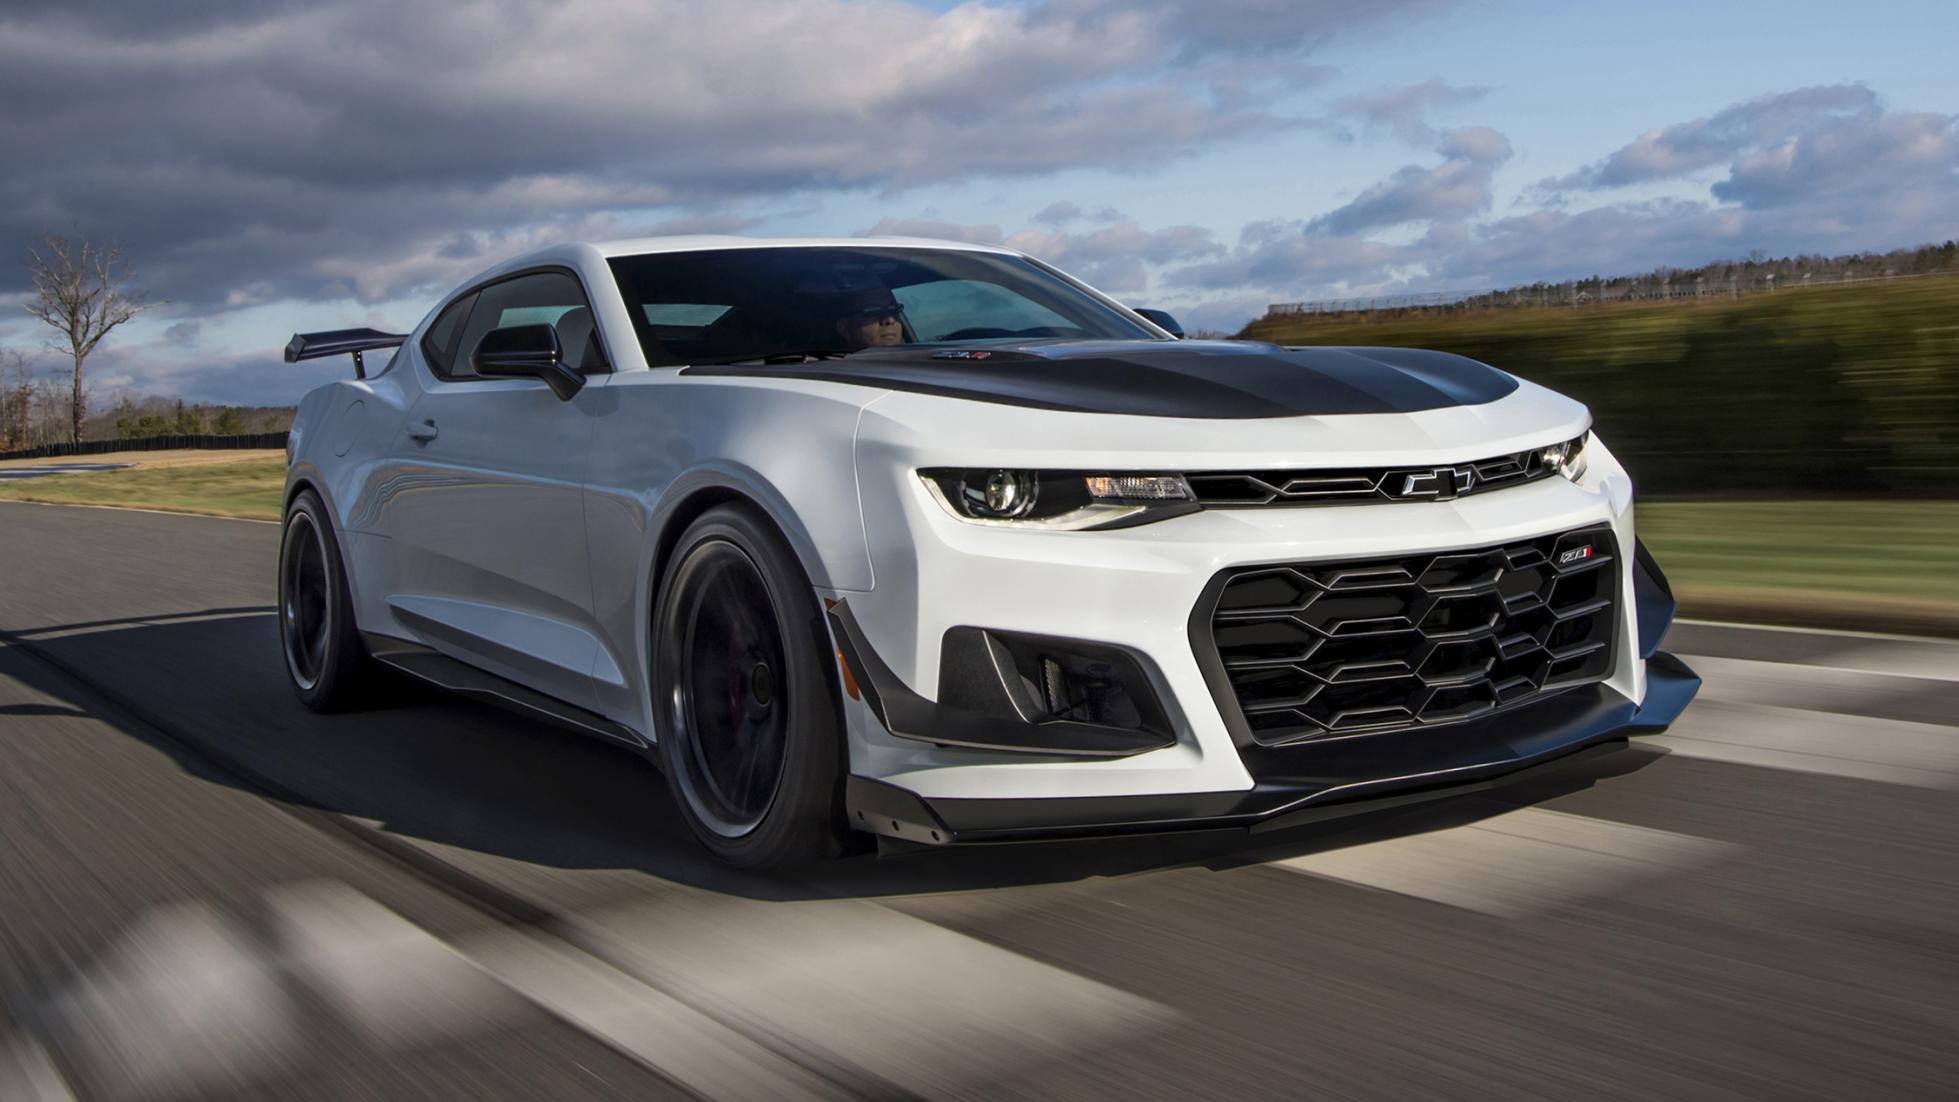 TopGear The Chevy Camaro ZL1 1LE now gets a tenspeed gearbox